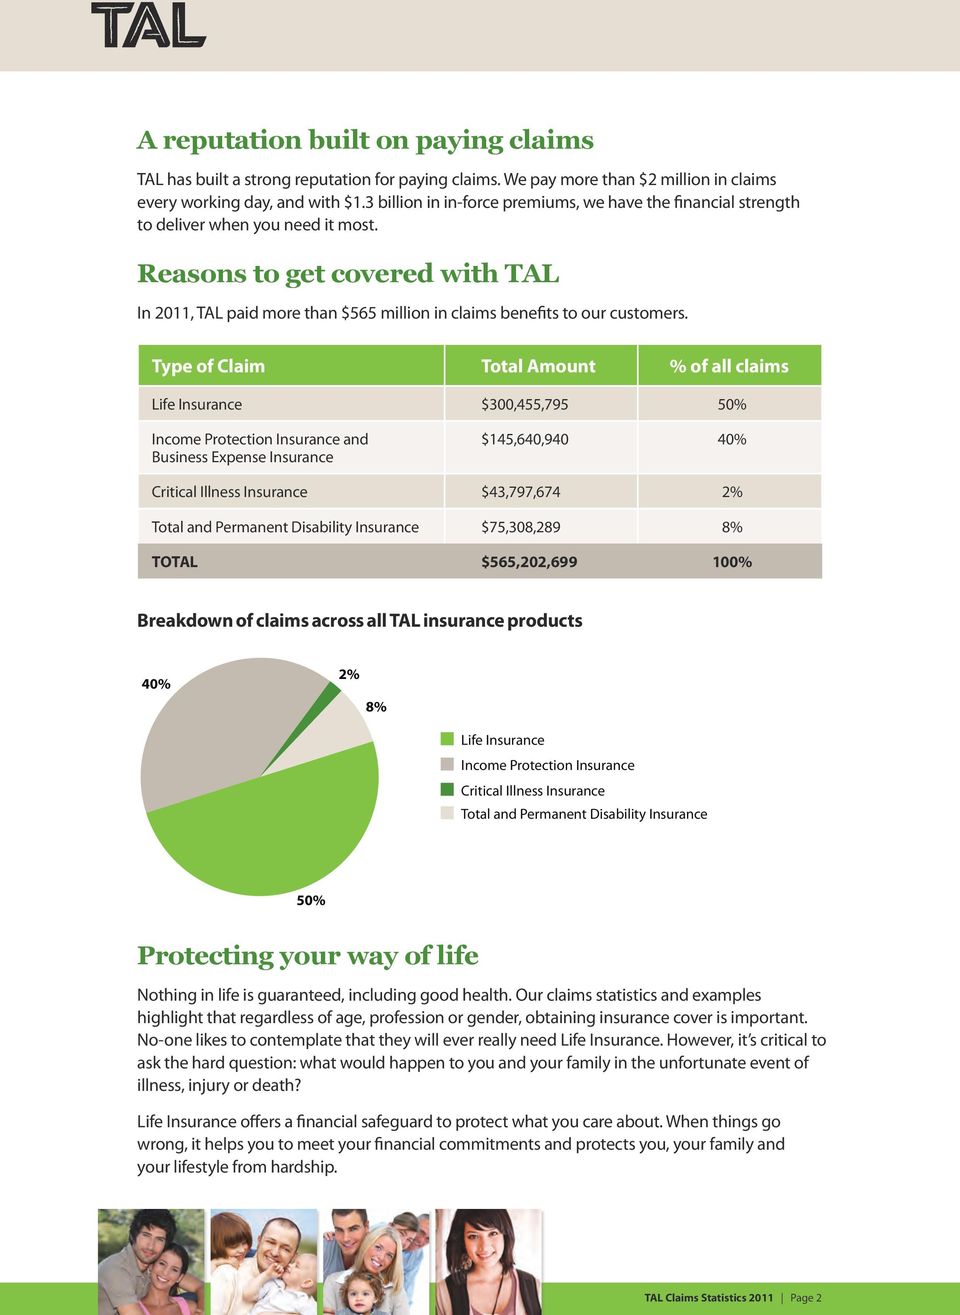 Reasons to get covered with TAL In 2011, TAL paid more than $565 million in claims benefits to our customers.